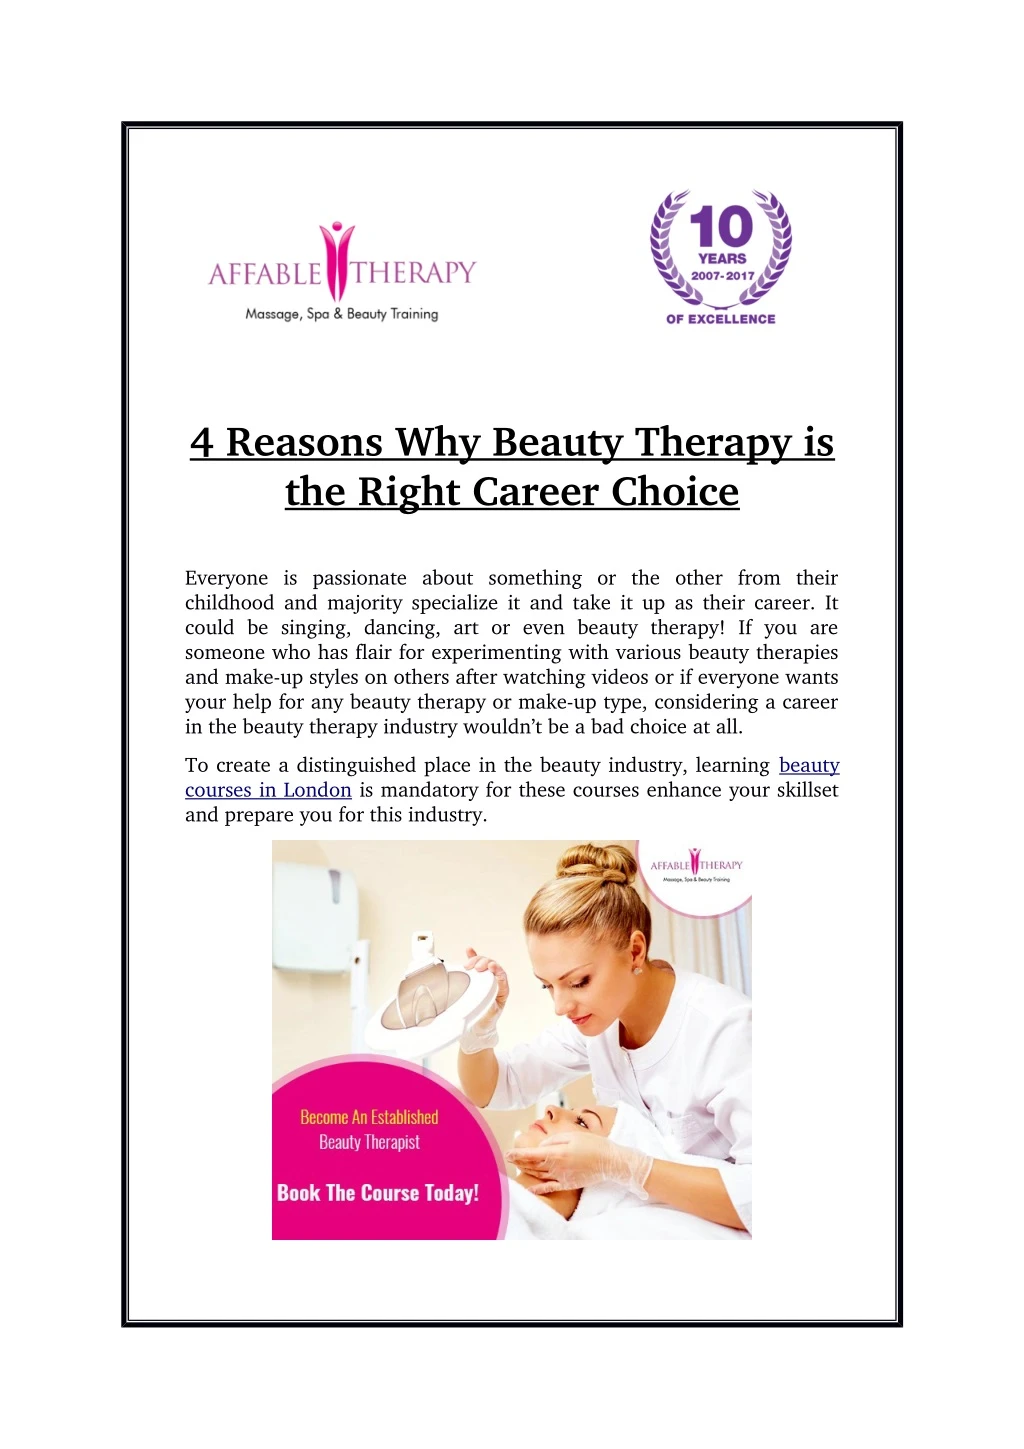 4 reasons why beauty therapy is the right career